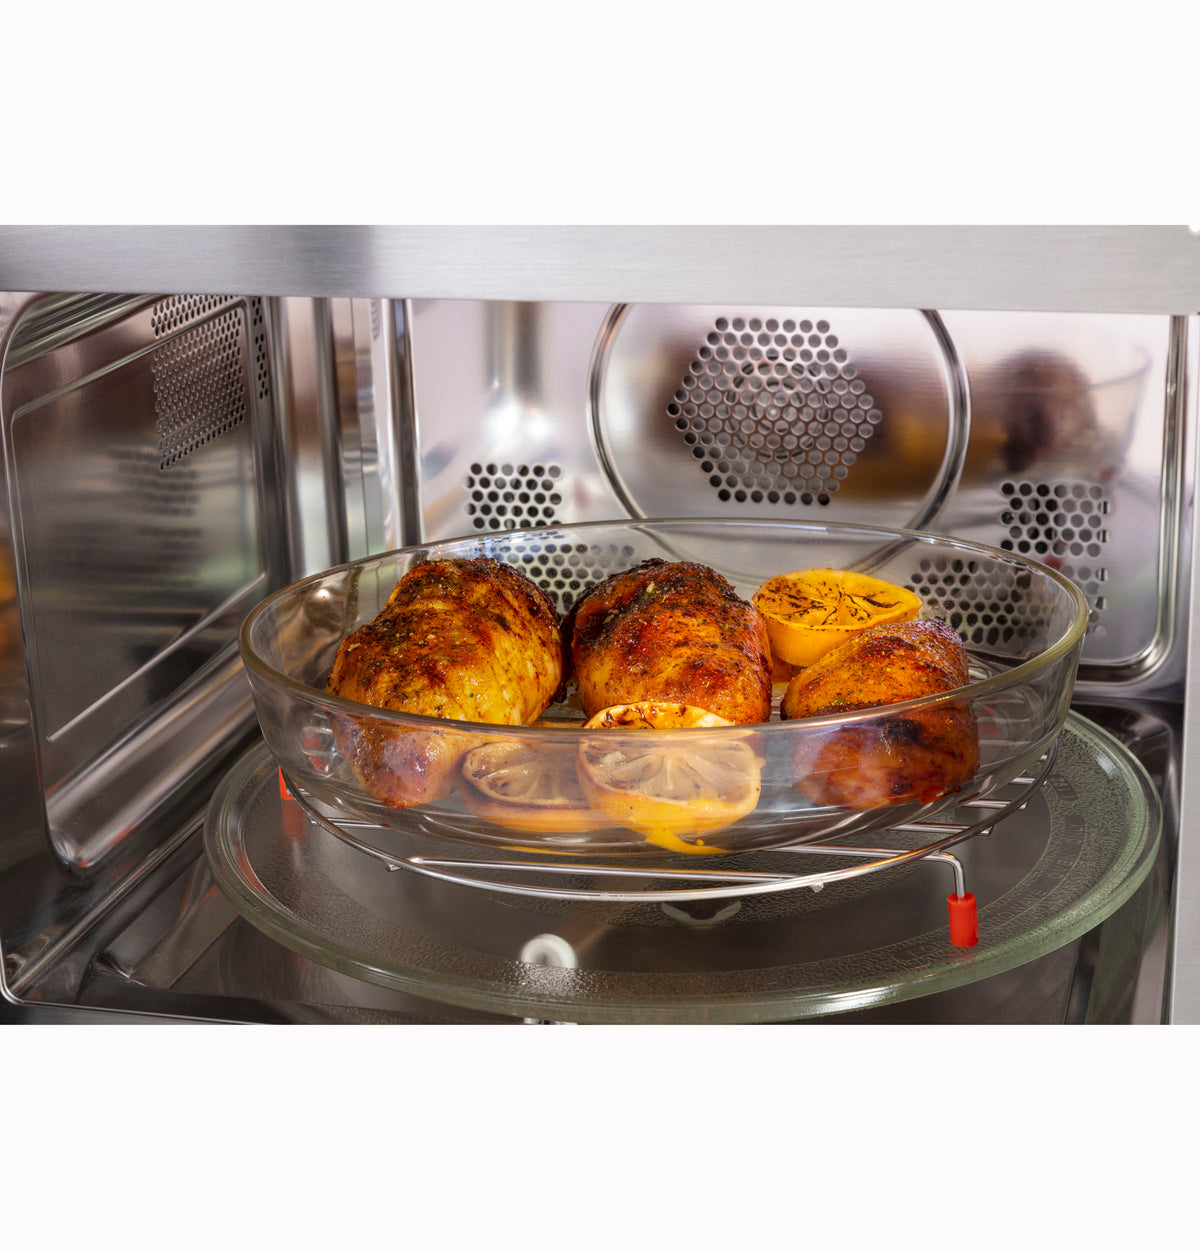 https://www.geaprusa.shop/wp-content/uploads/1693/72/ge-1-0-cu-ft-capacity-countertop-convection-microwave-oven-with-air-fry-ge-appliances-pr-online-store-get-the-look-a-lower-price_9.jpg